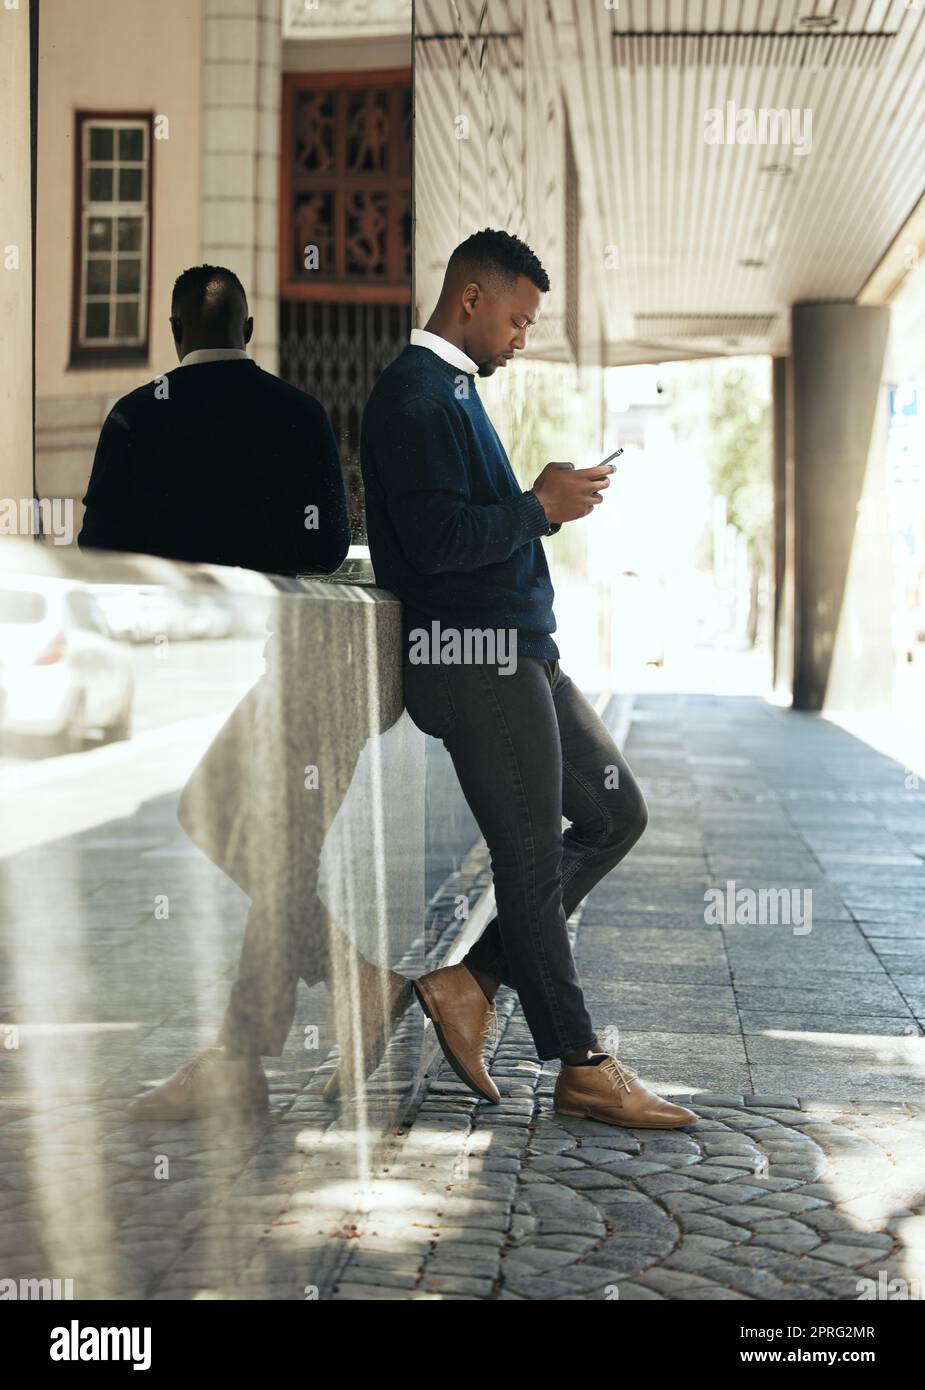 Networking, phone call and businessman in city reading email, schedule agenda or social media. Manager employee working, thinking or texting online while standing outside the office building Stock Photo